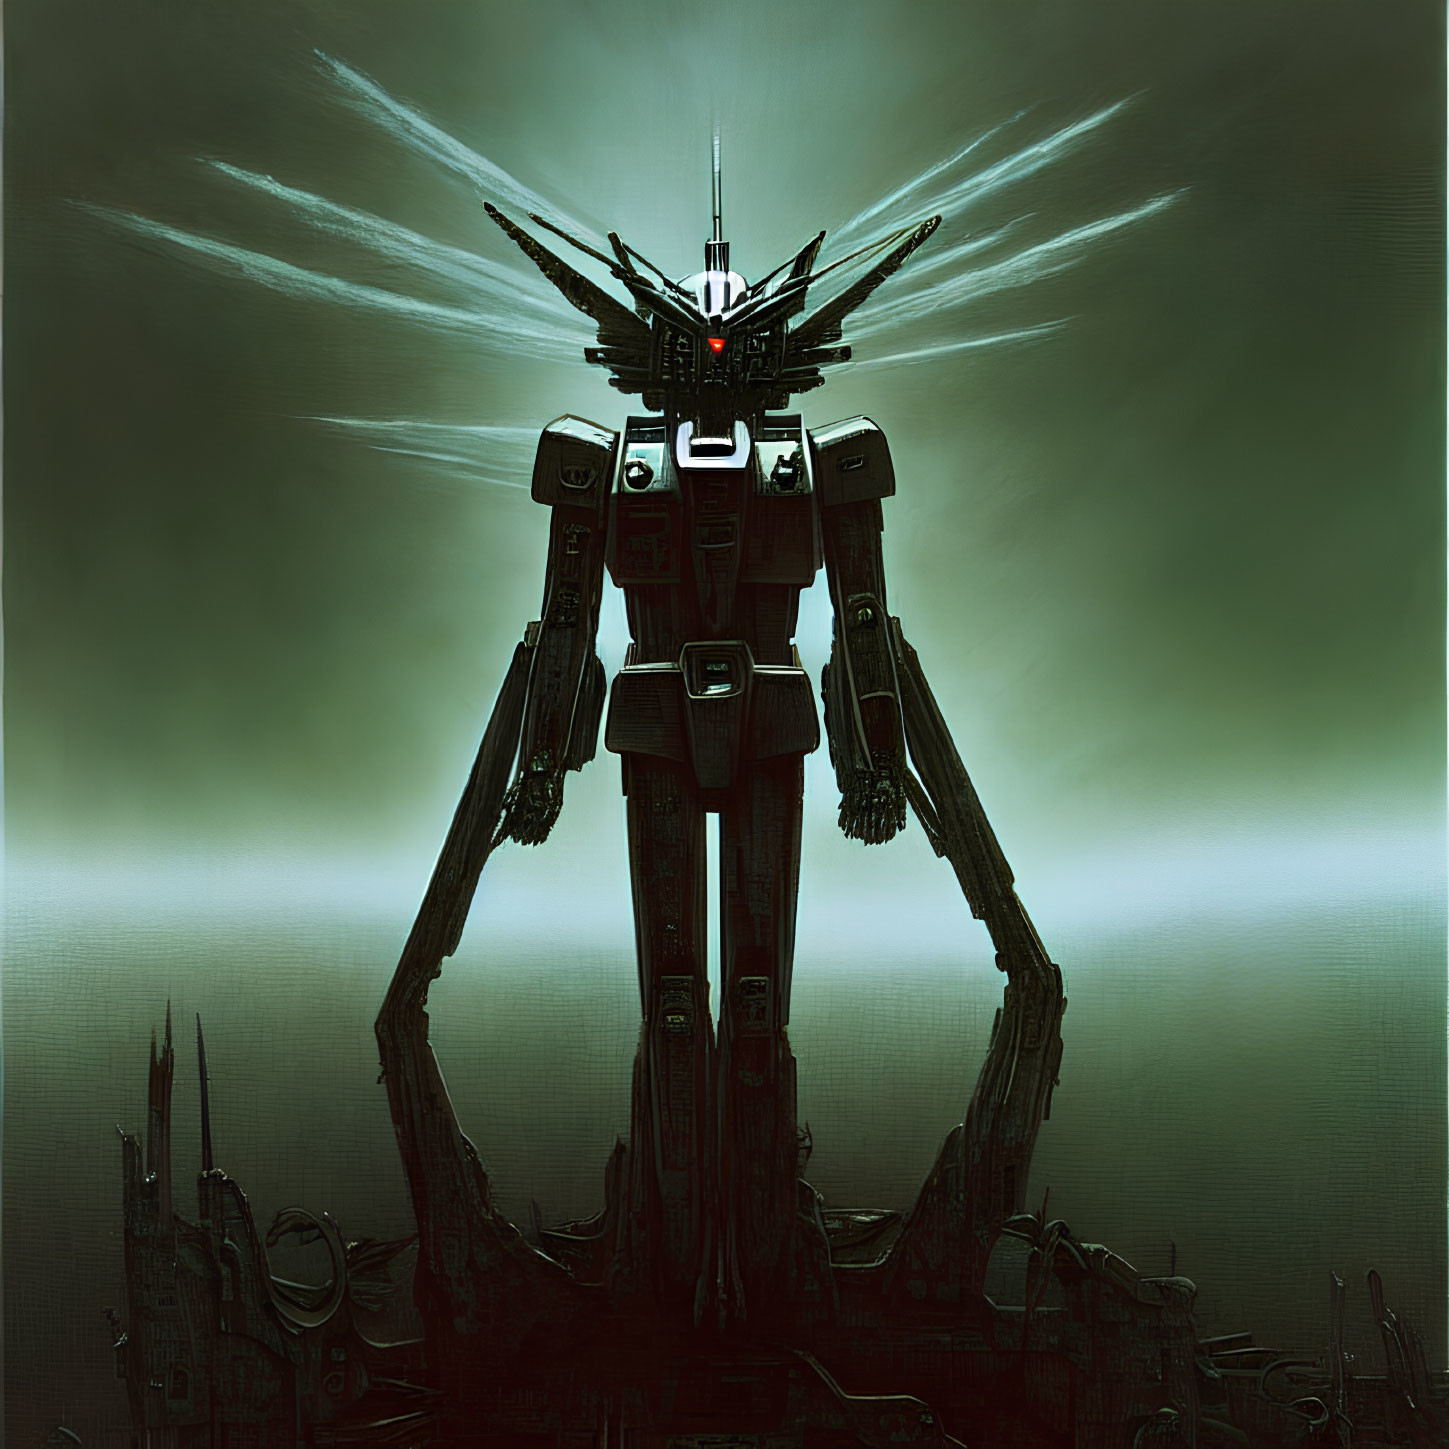 Giant robotic figure with red glowing eyes in misty green background